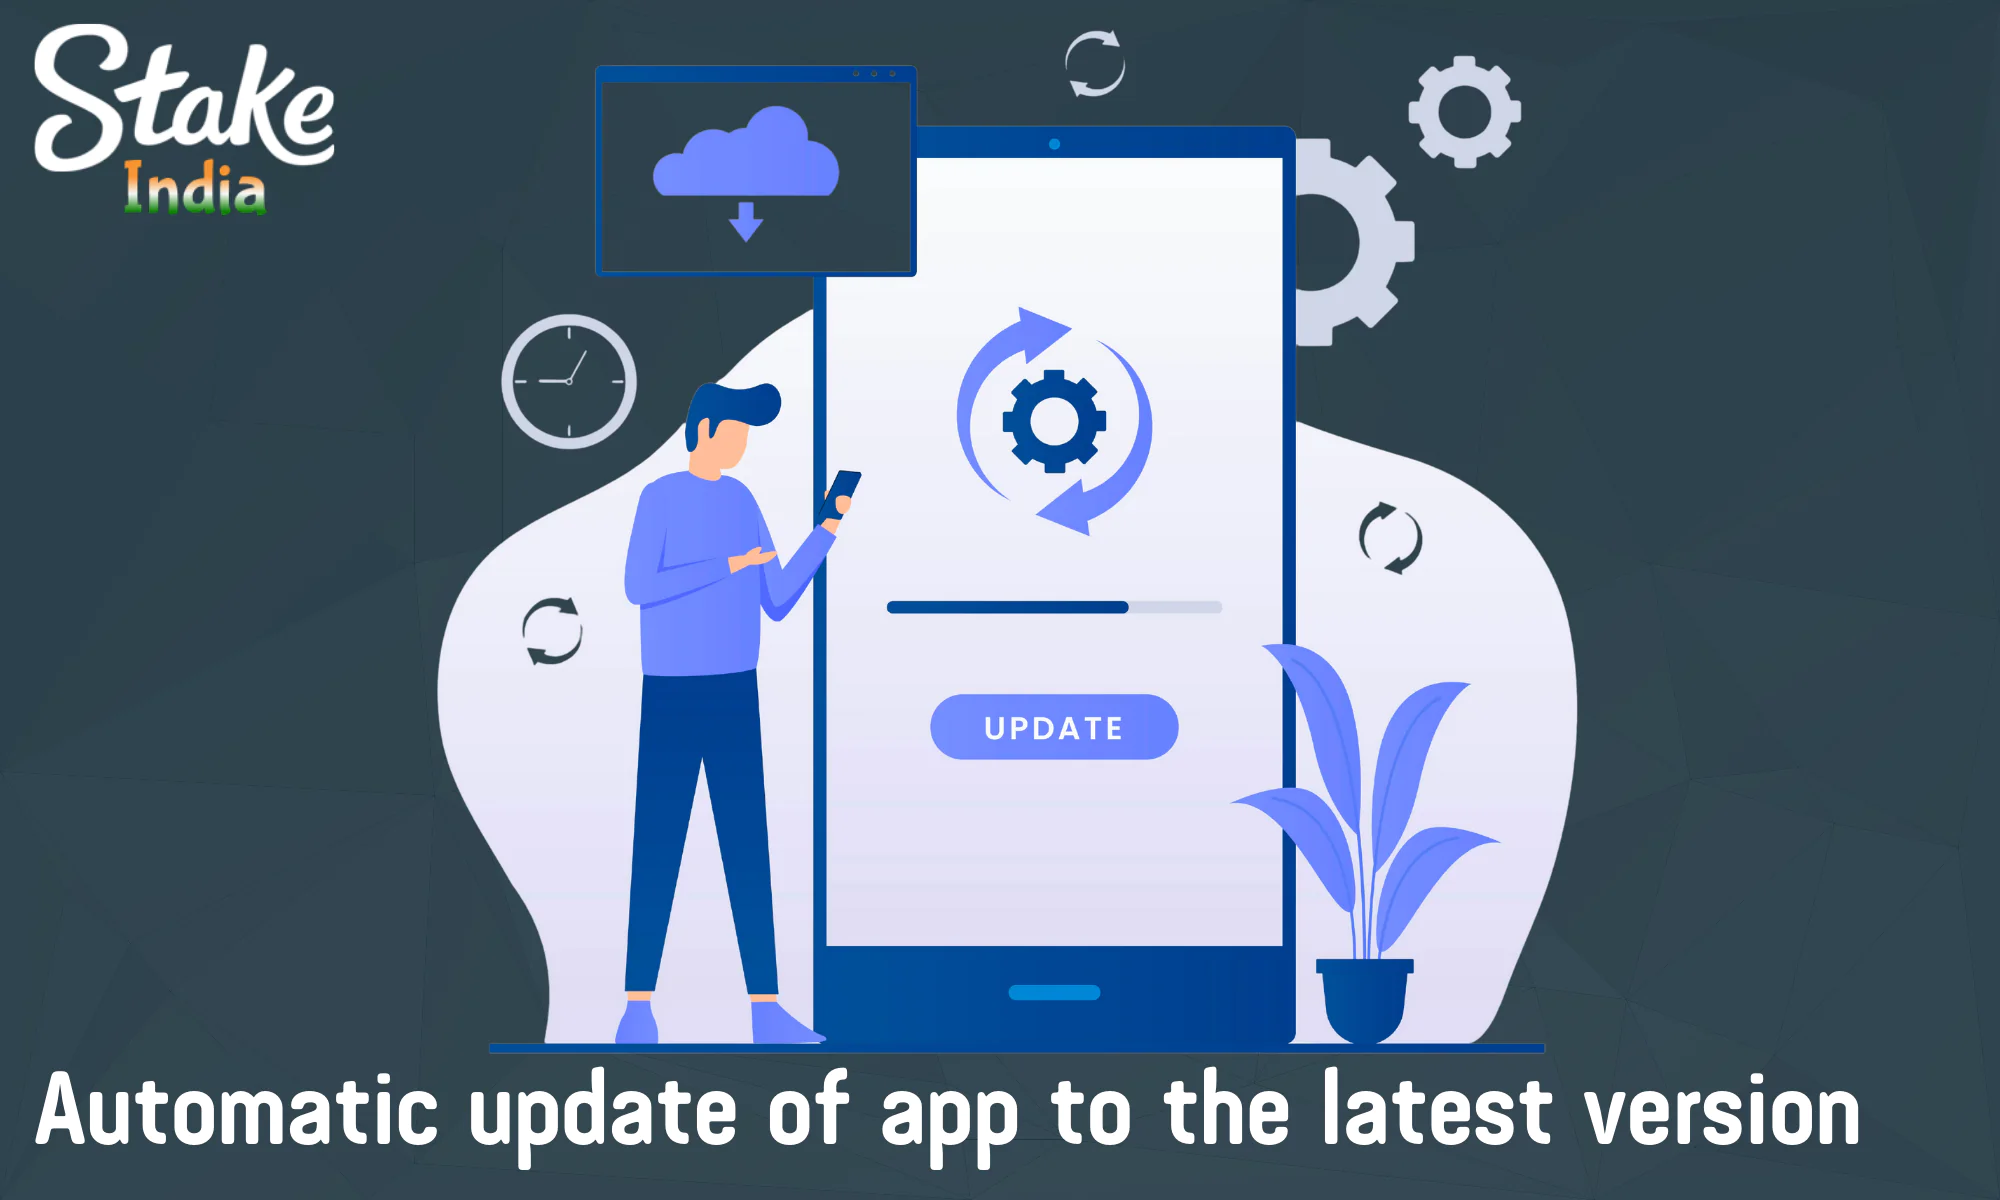 How to enable automatic updates for the Stake app